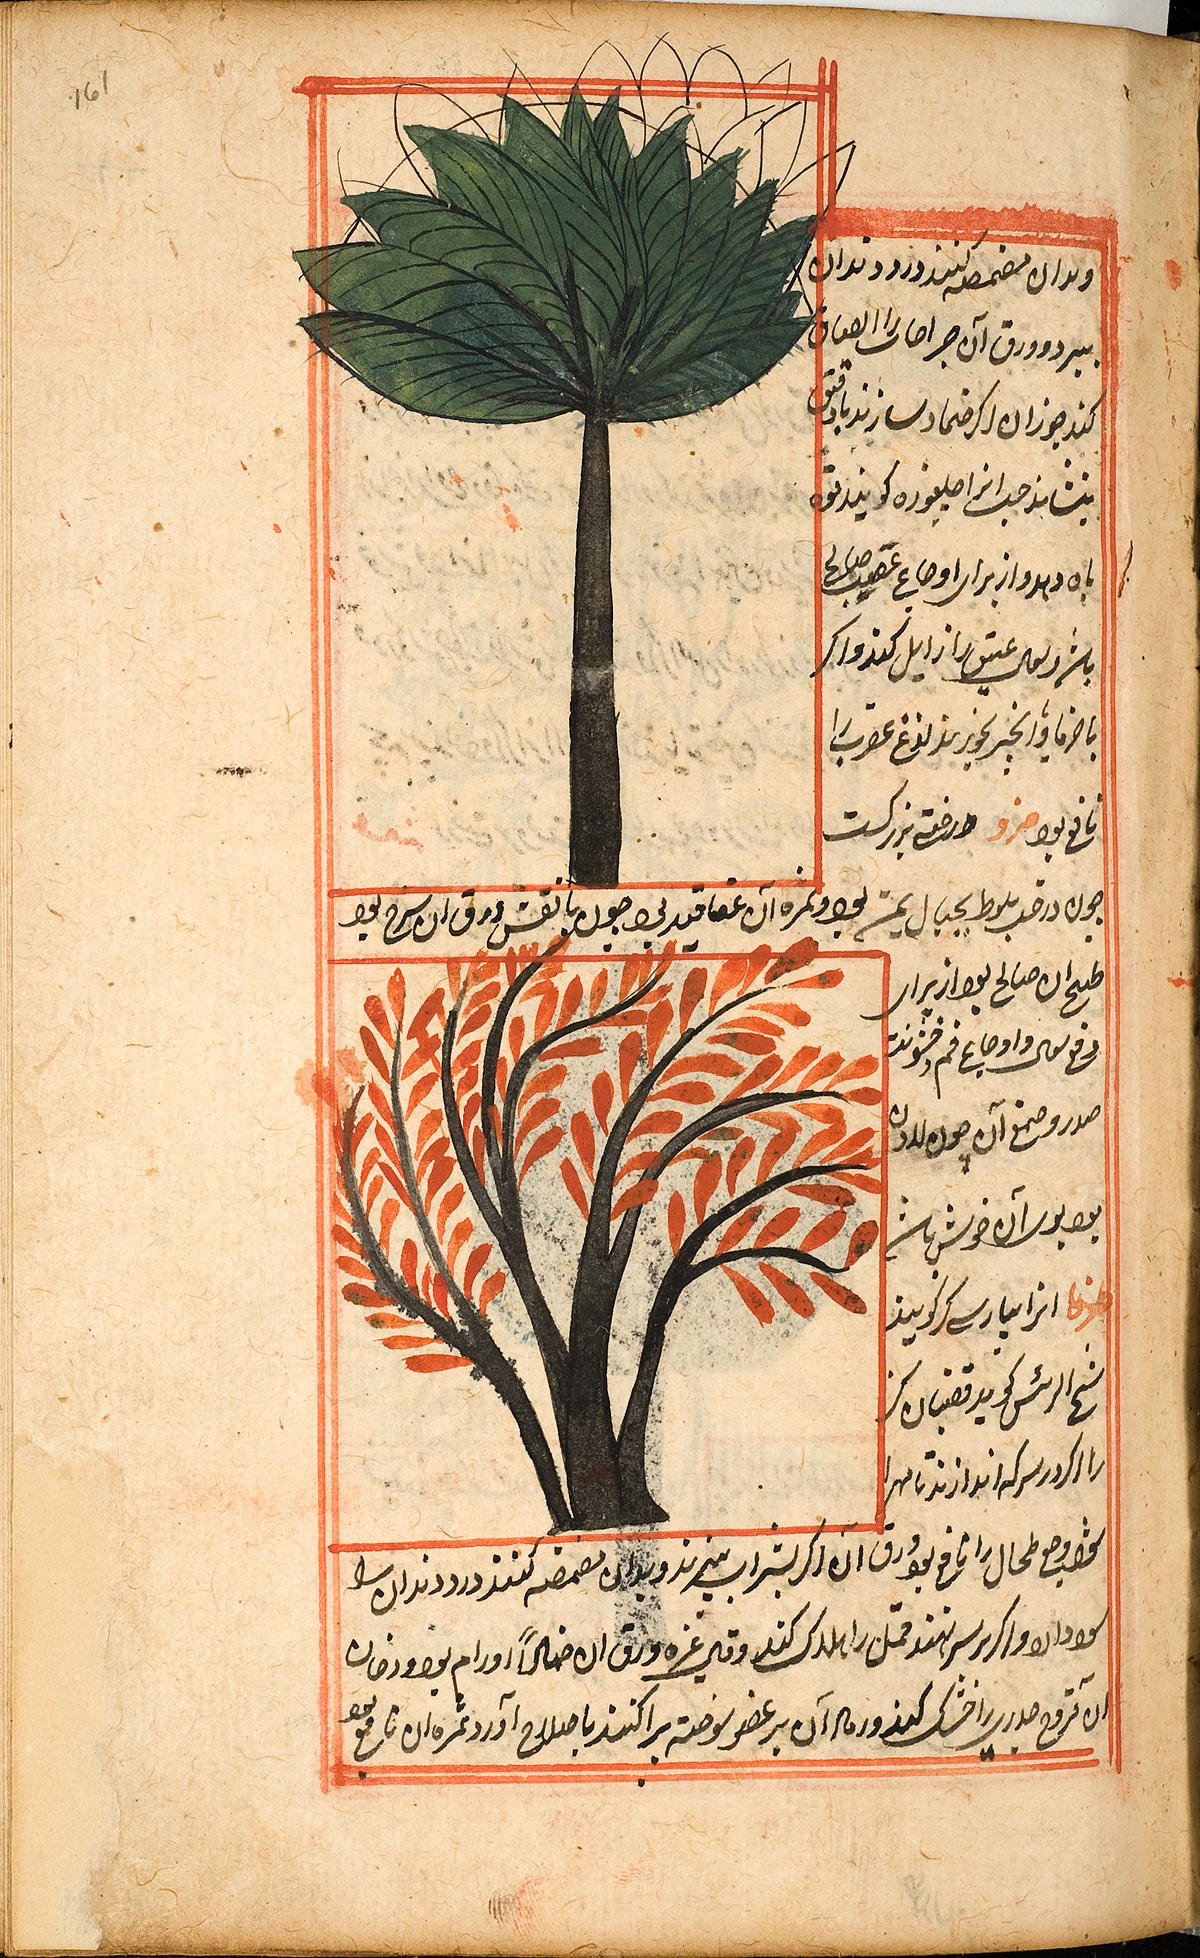 Two trees native to the Middle East, the top one with large green leaves pointed upwards resembling a banana plant, the bottom one is shorter like a bush with red leaves, surrounded by Persian text and a red double ruled border.